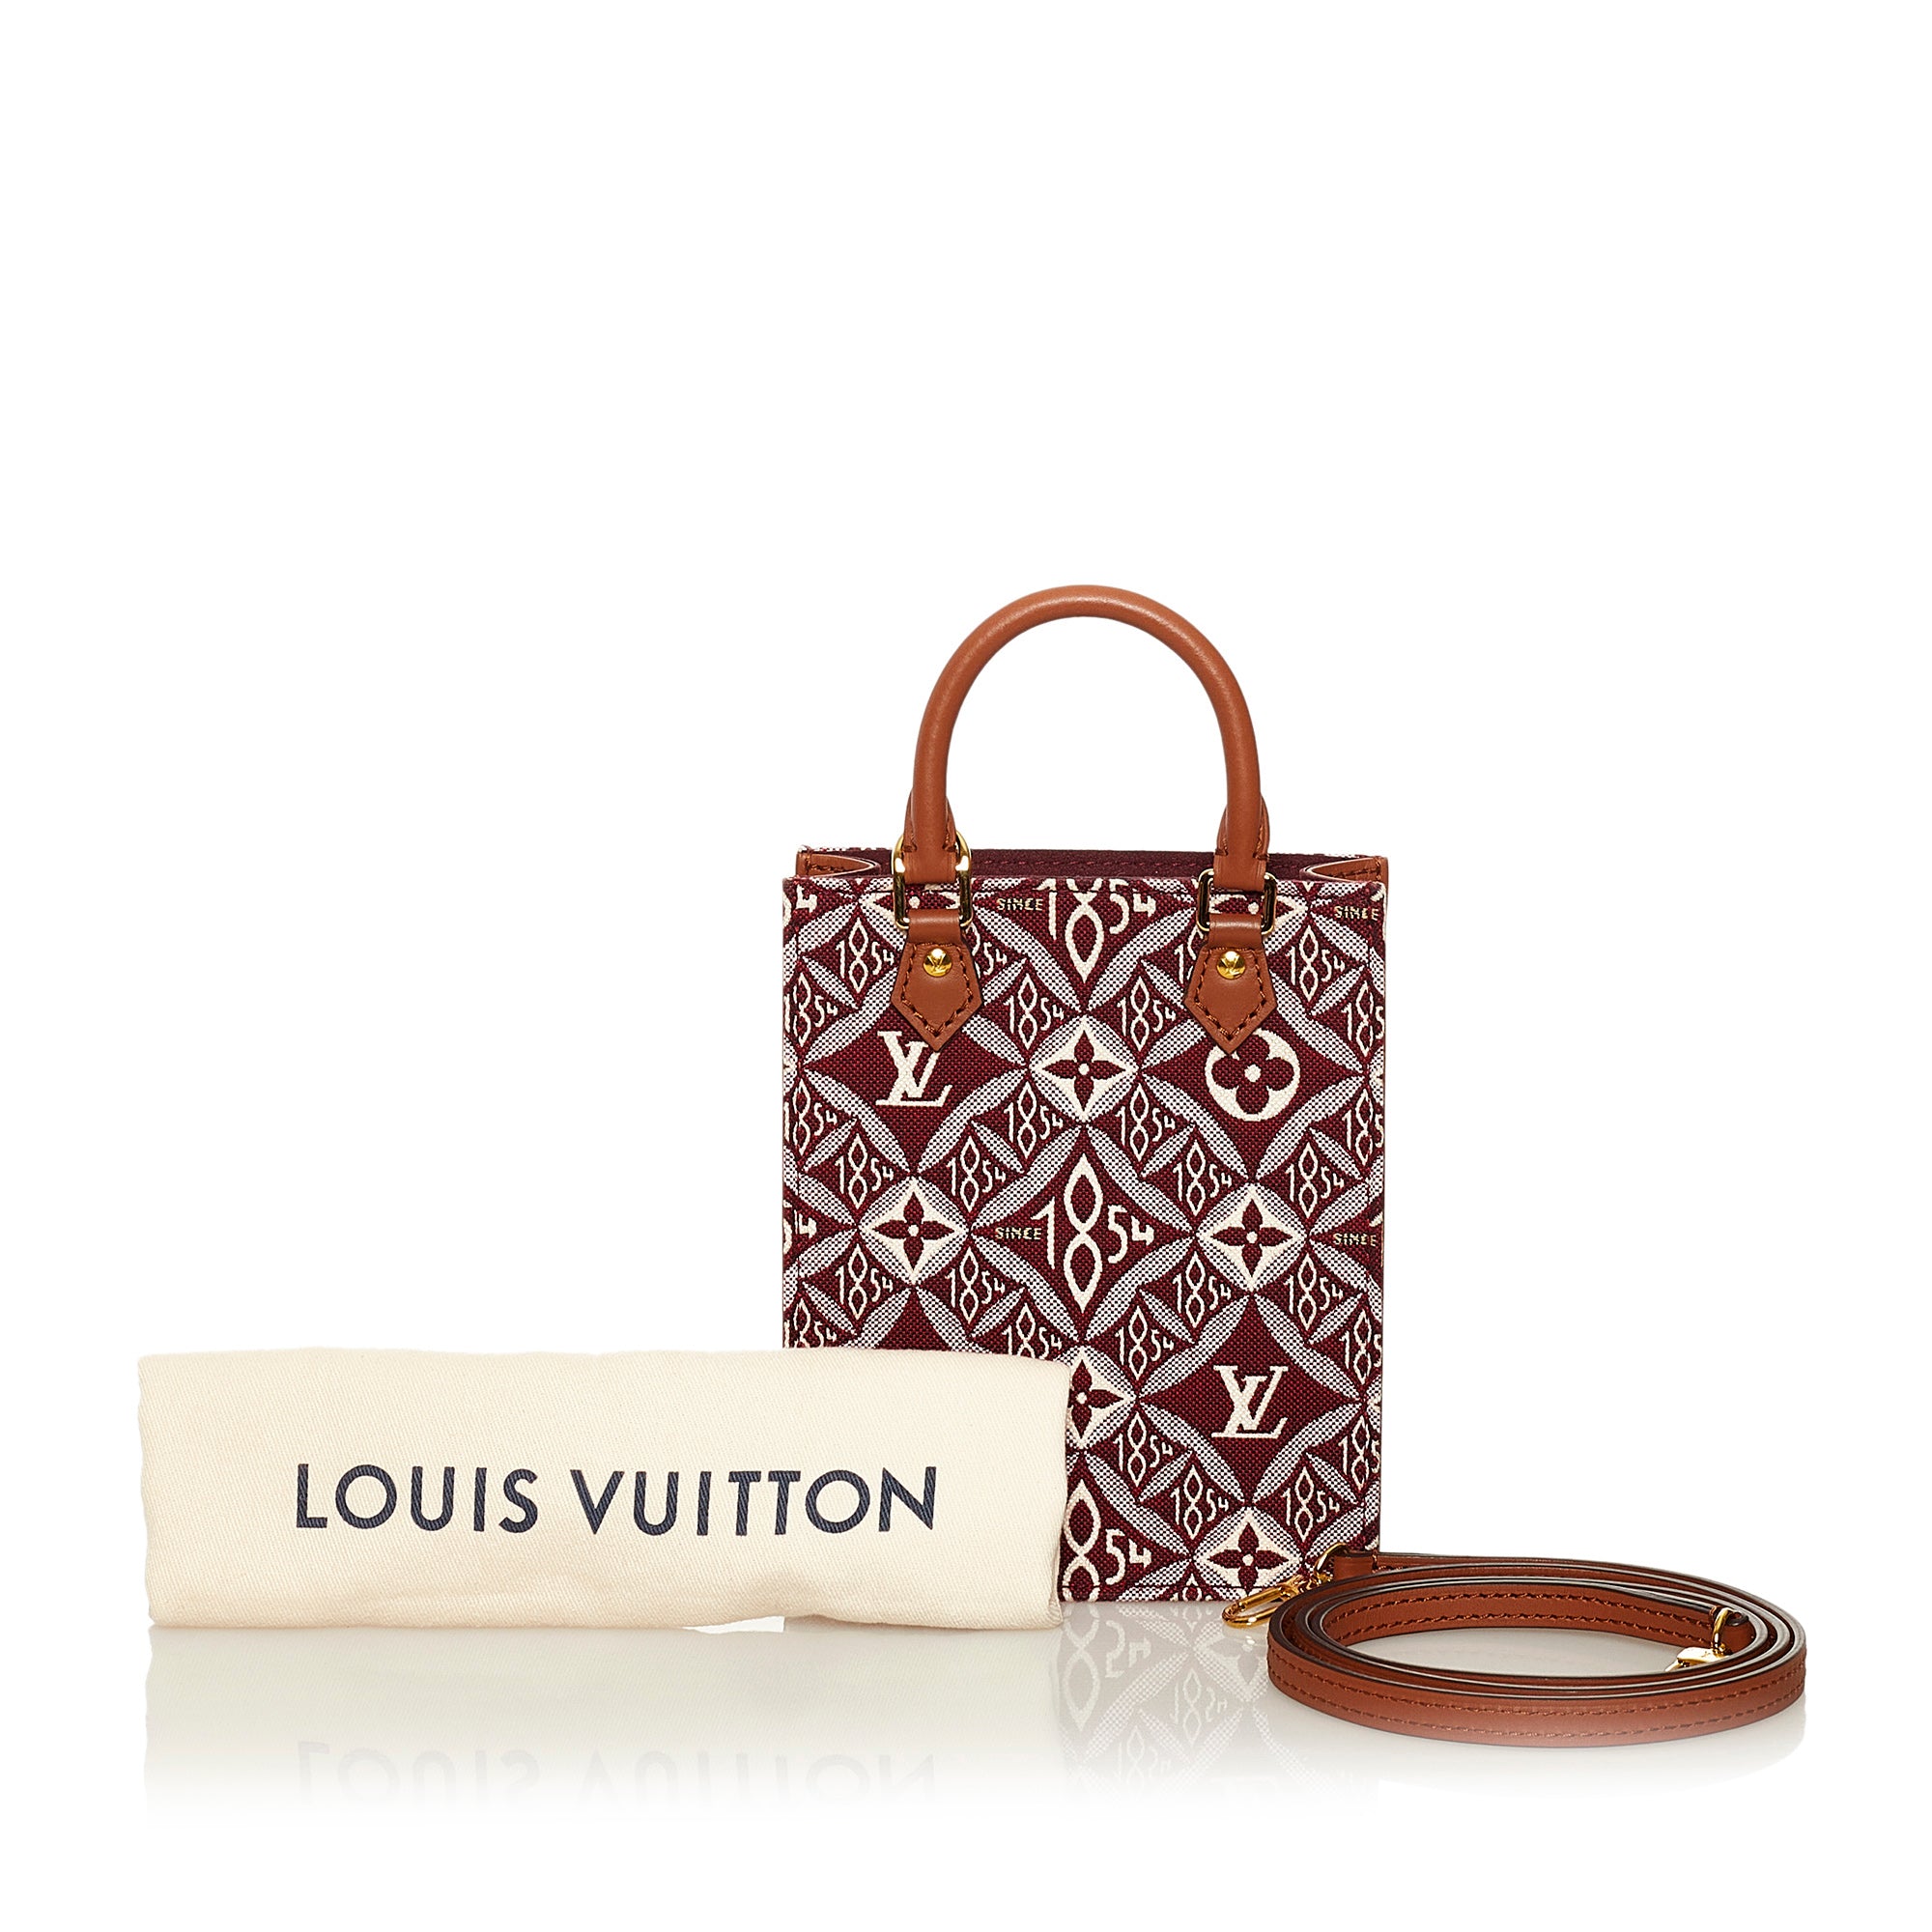 Louis Vuitton's Monogram Gets An Update With SINCE 1854 Collection